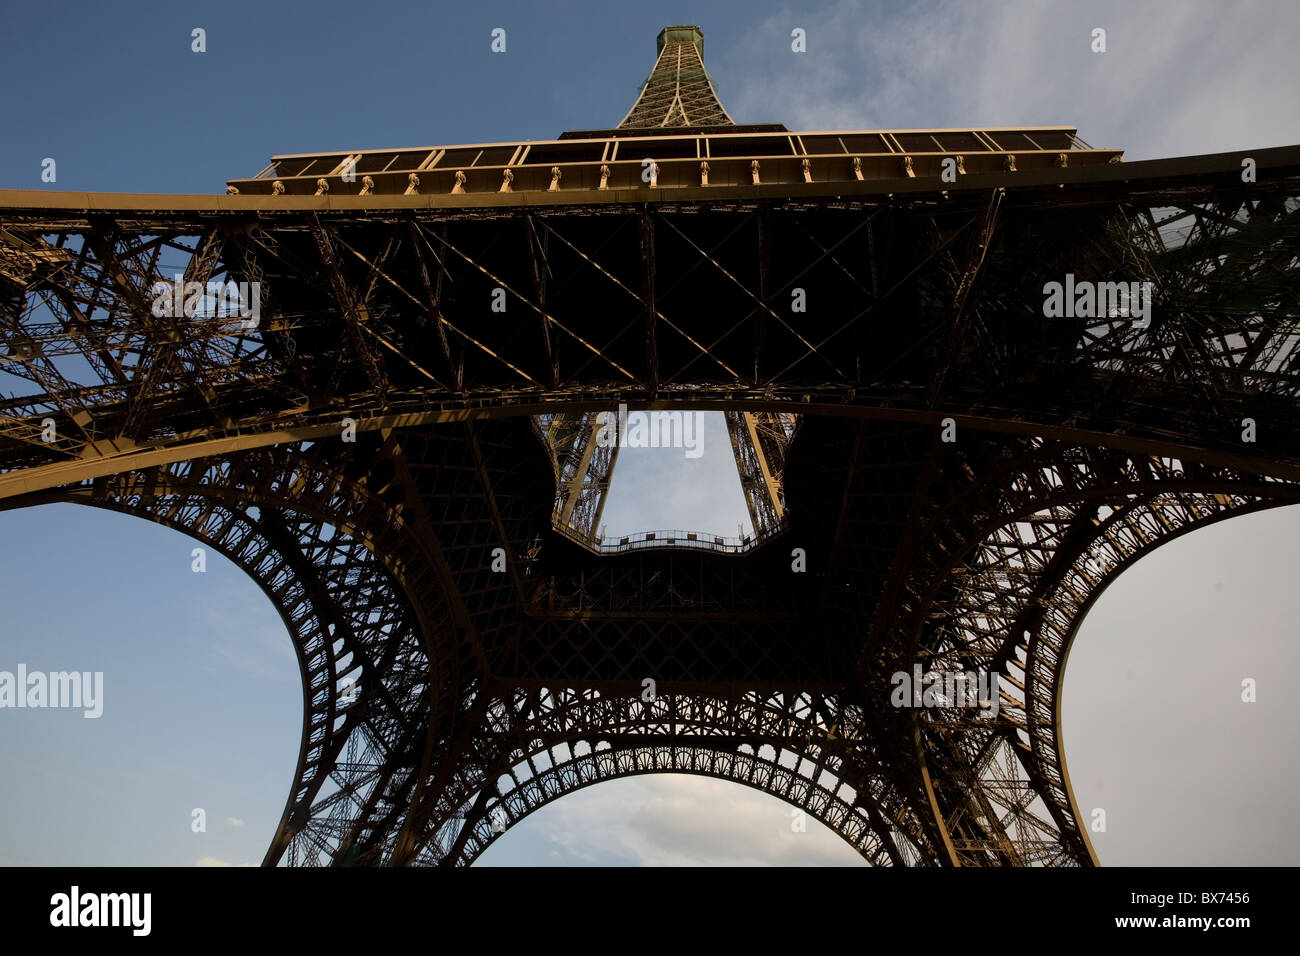 looking up at the eiffel tower from below Stock Photo